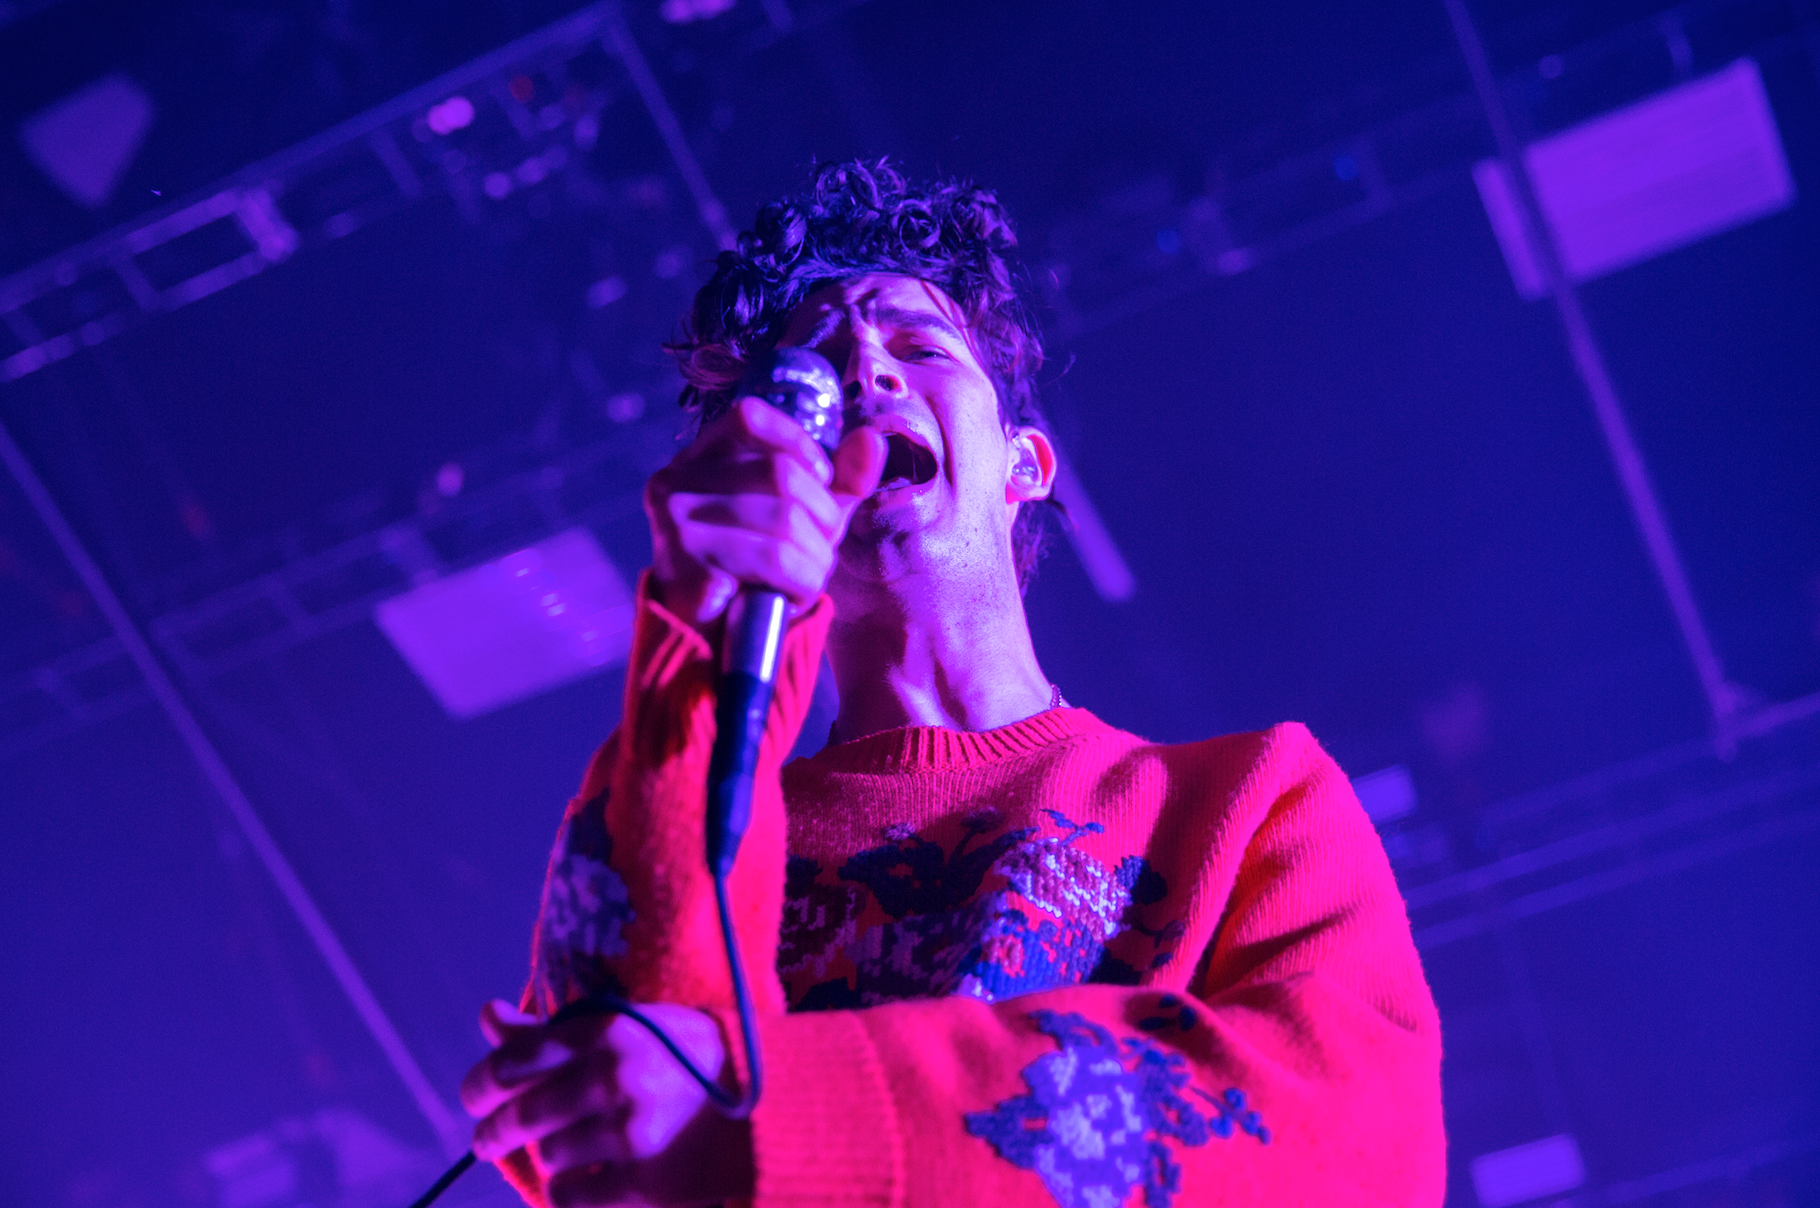 Concert+in+Review%3A+The+1975